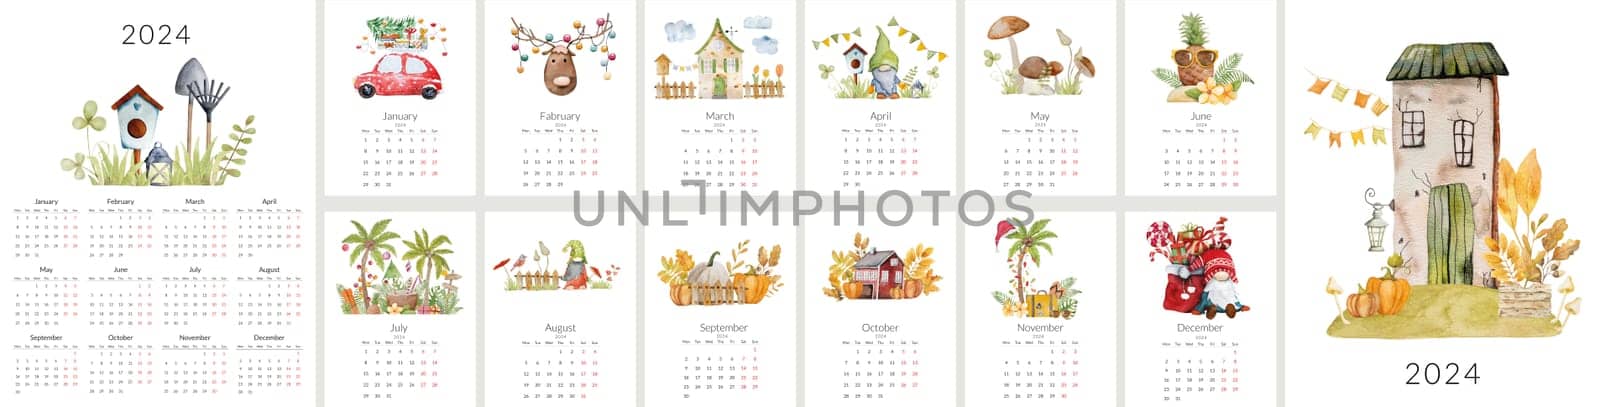 2024 calendar template with handmade watercolor illustrations